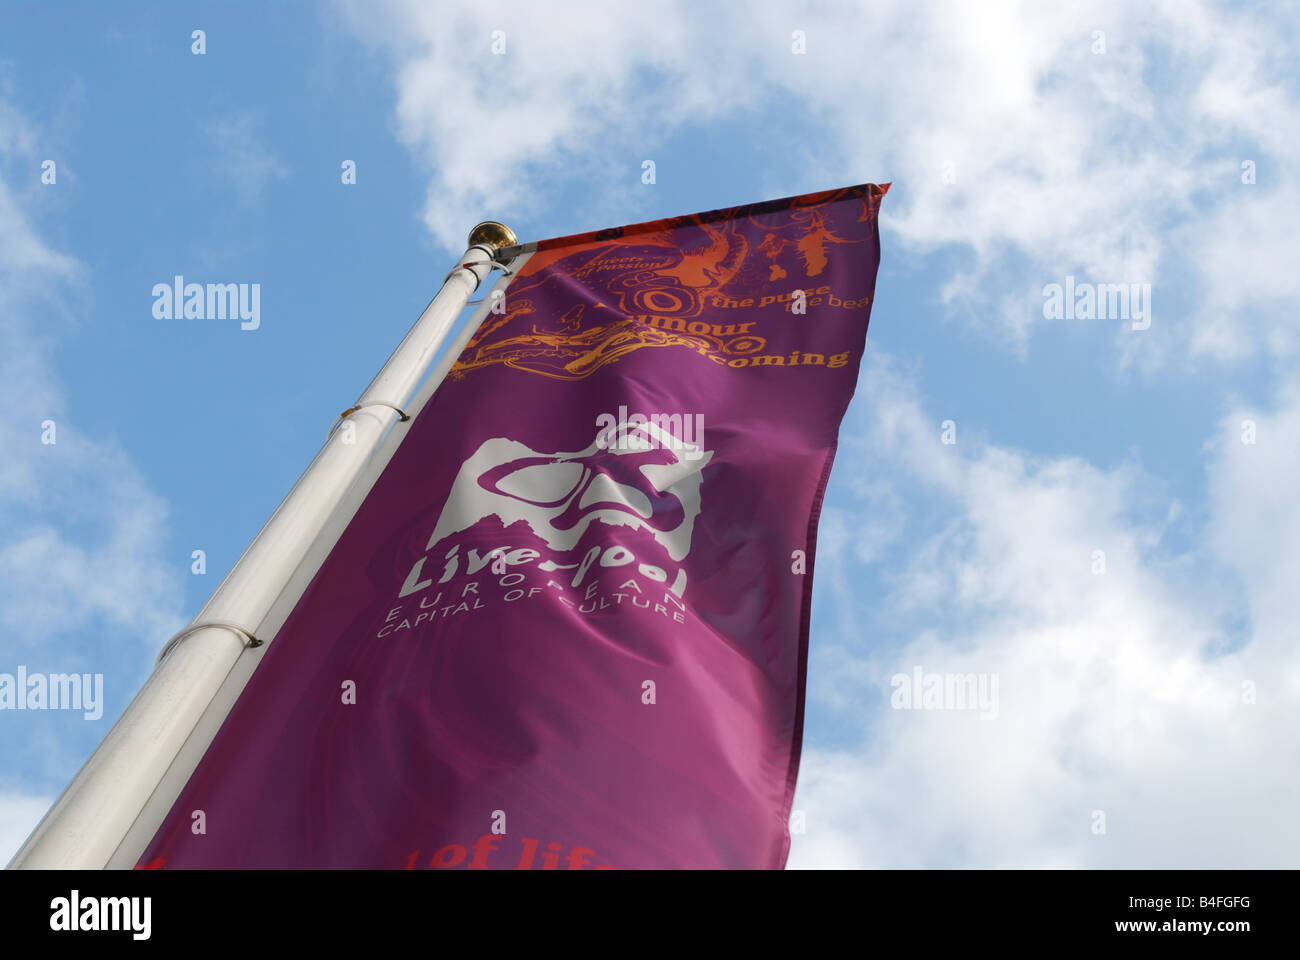 Liverpool European Capital of Culture 2008 Banner Stock Photo